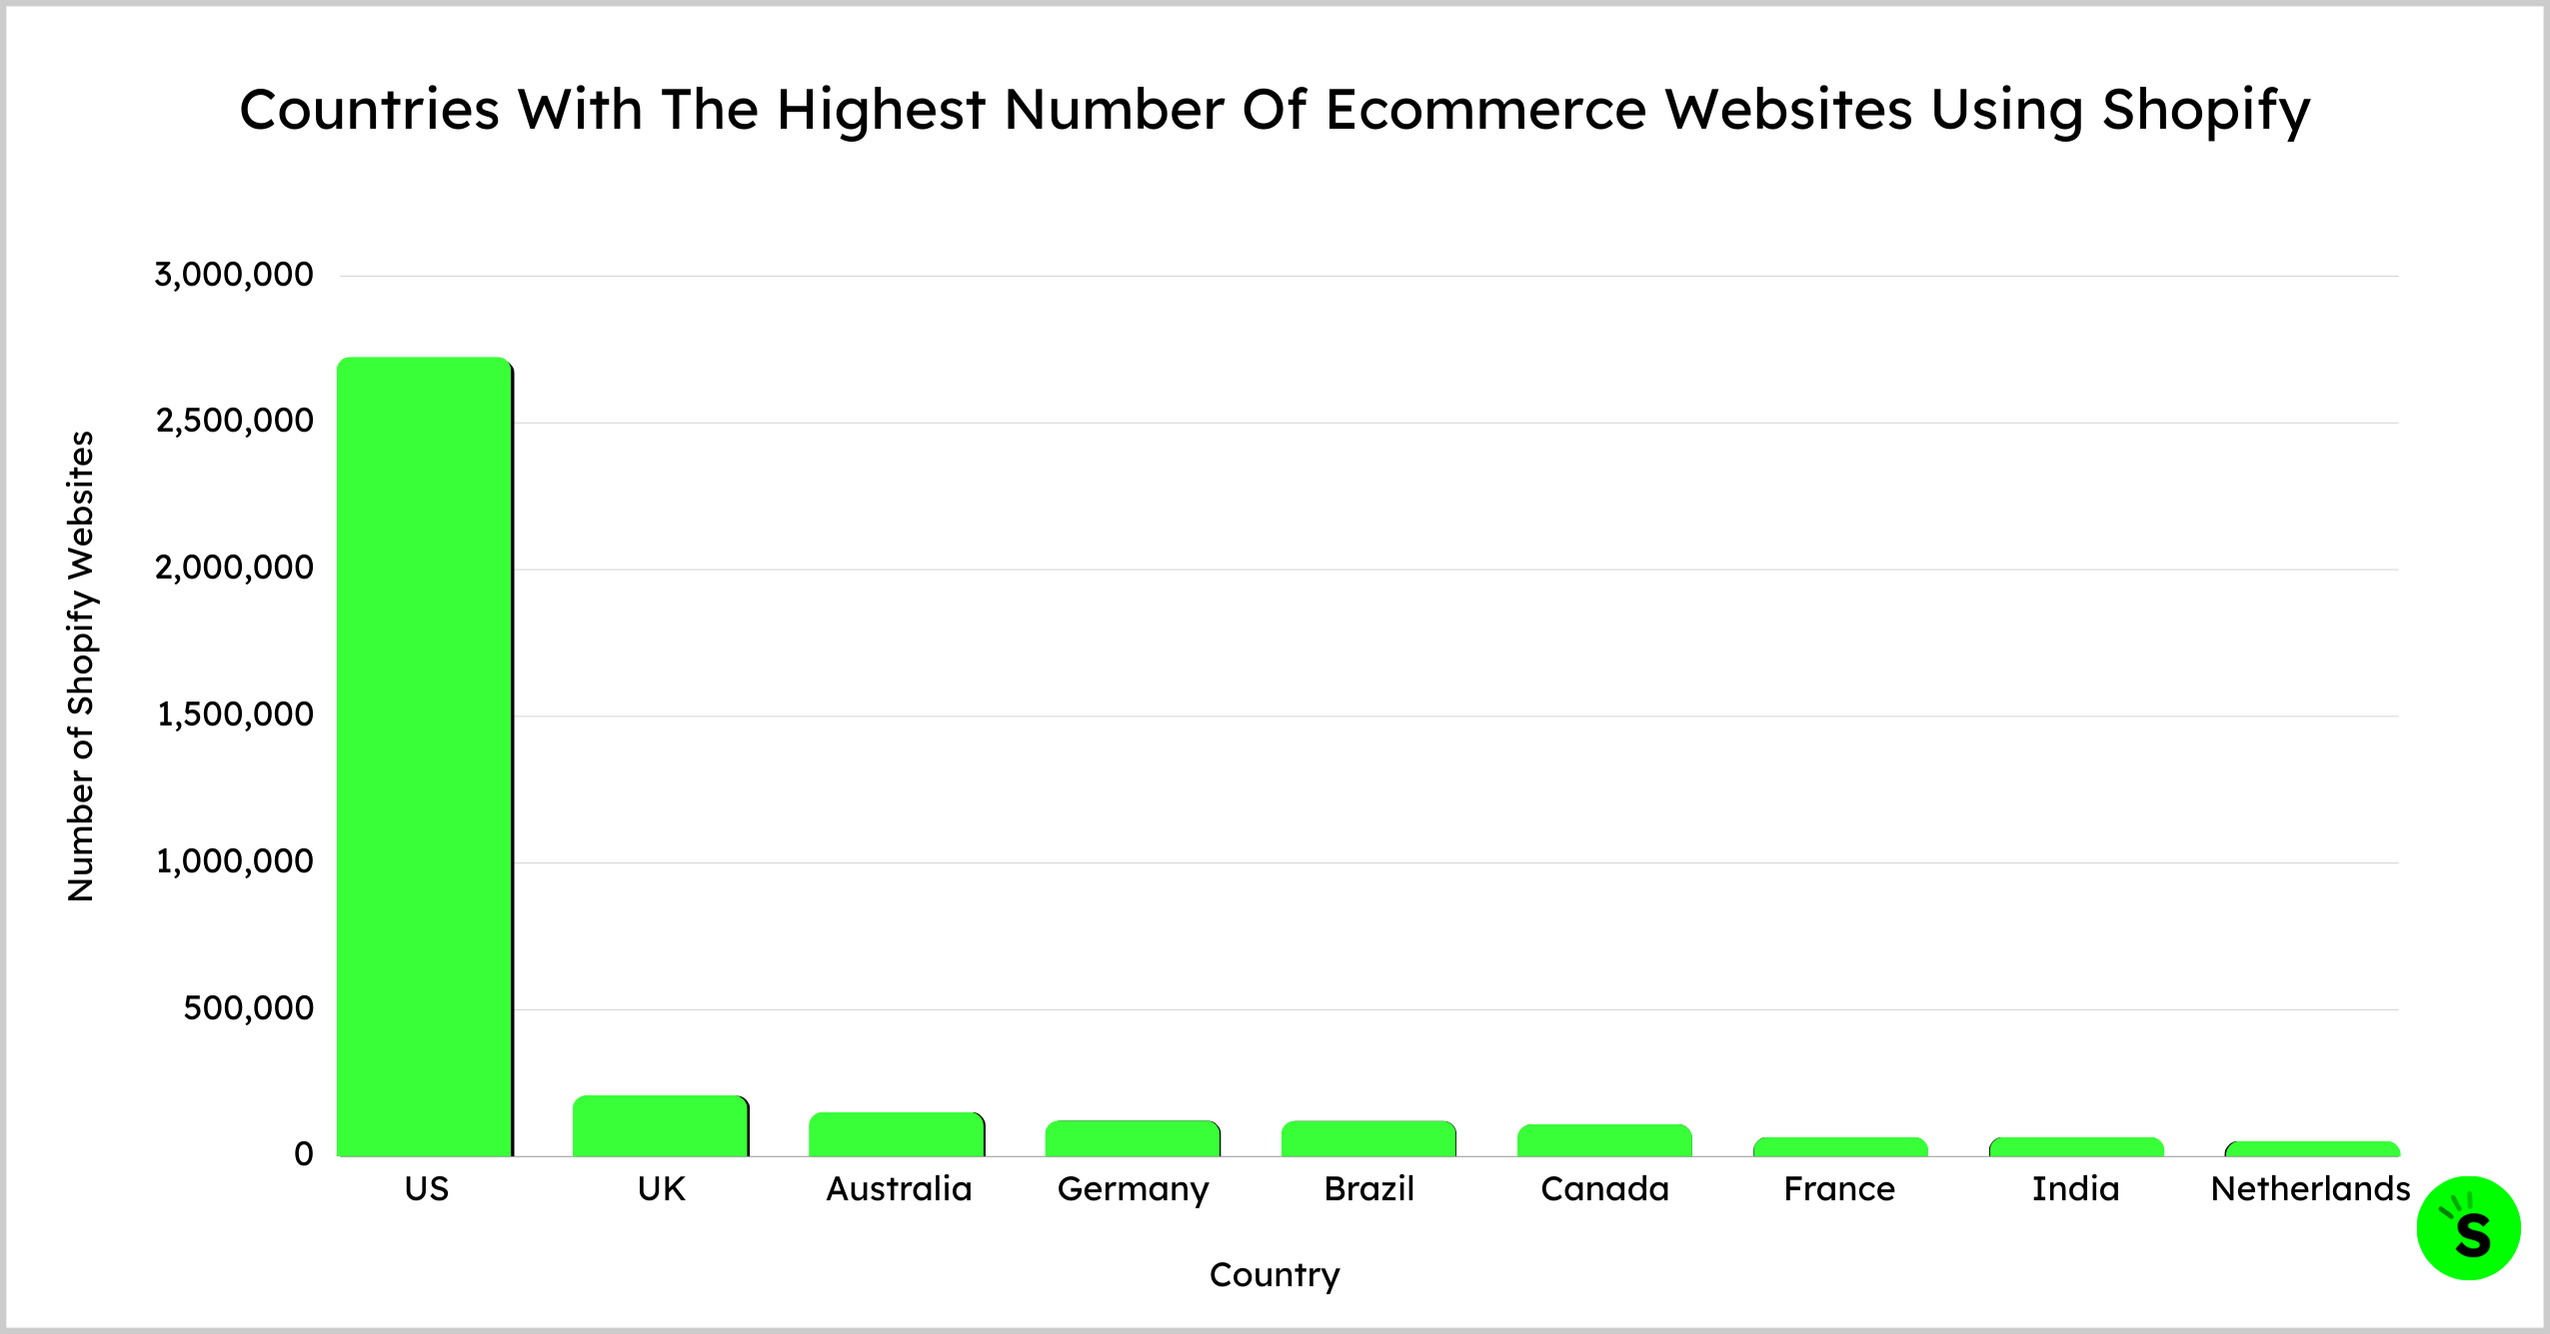 Countries With The Highest Number Of Ecommerce Websites 